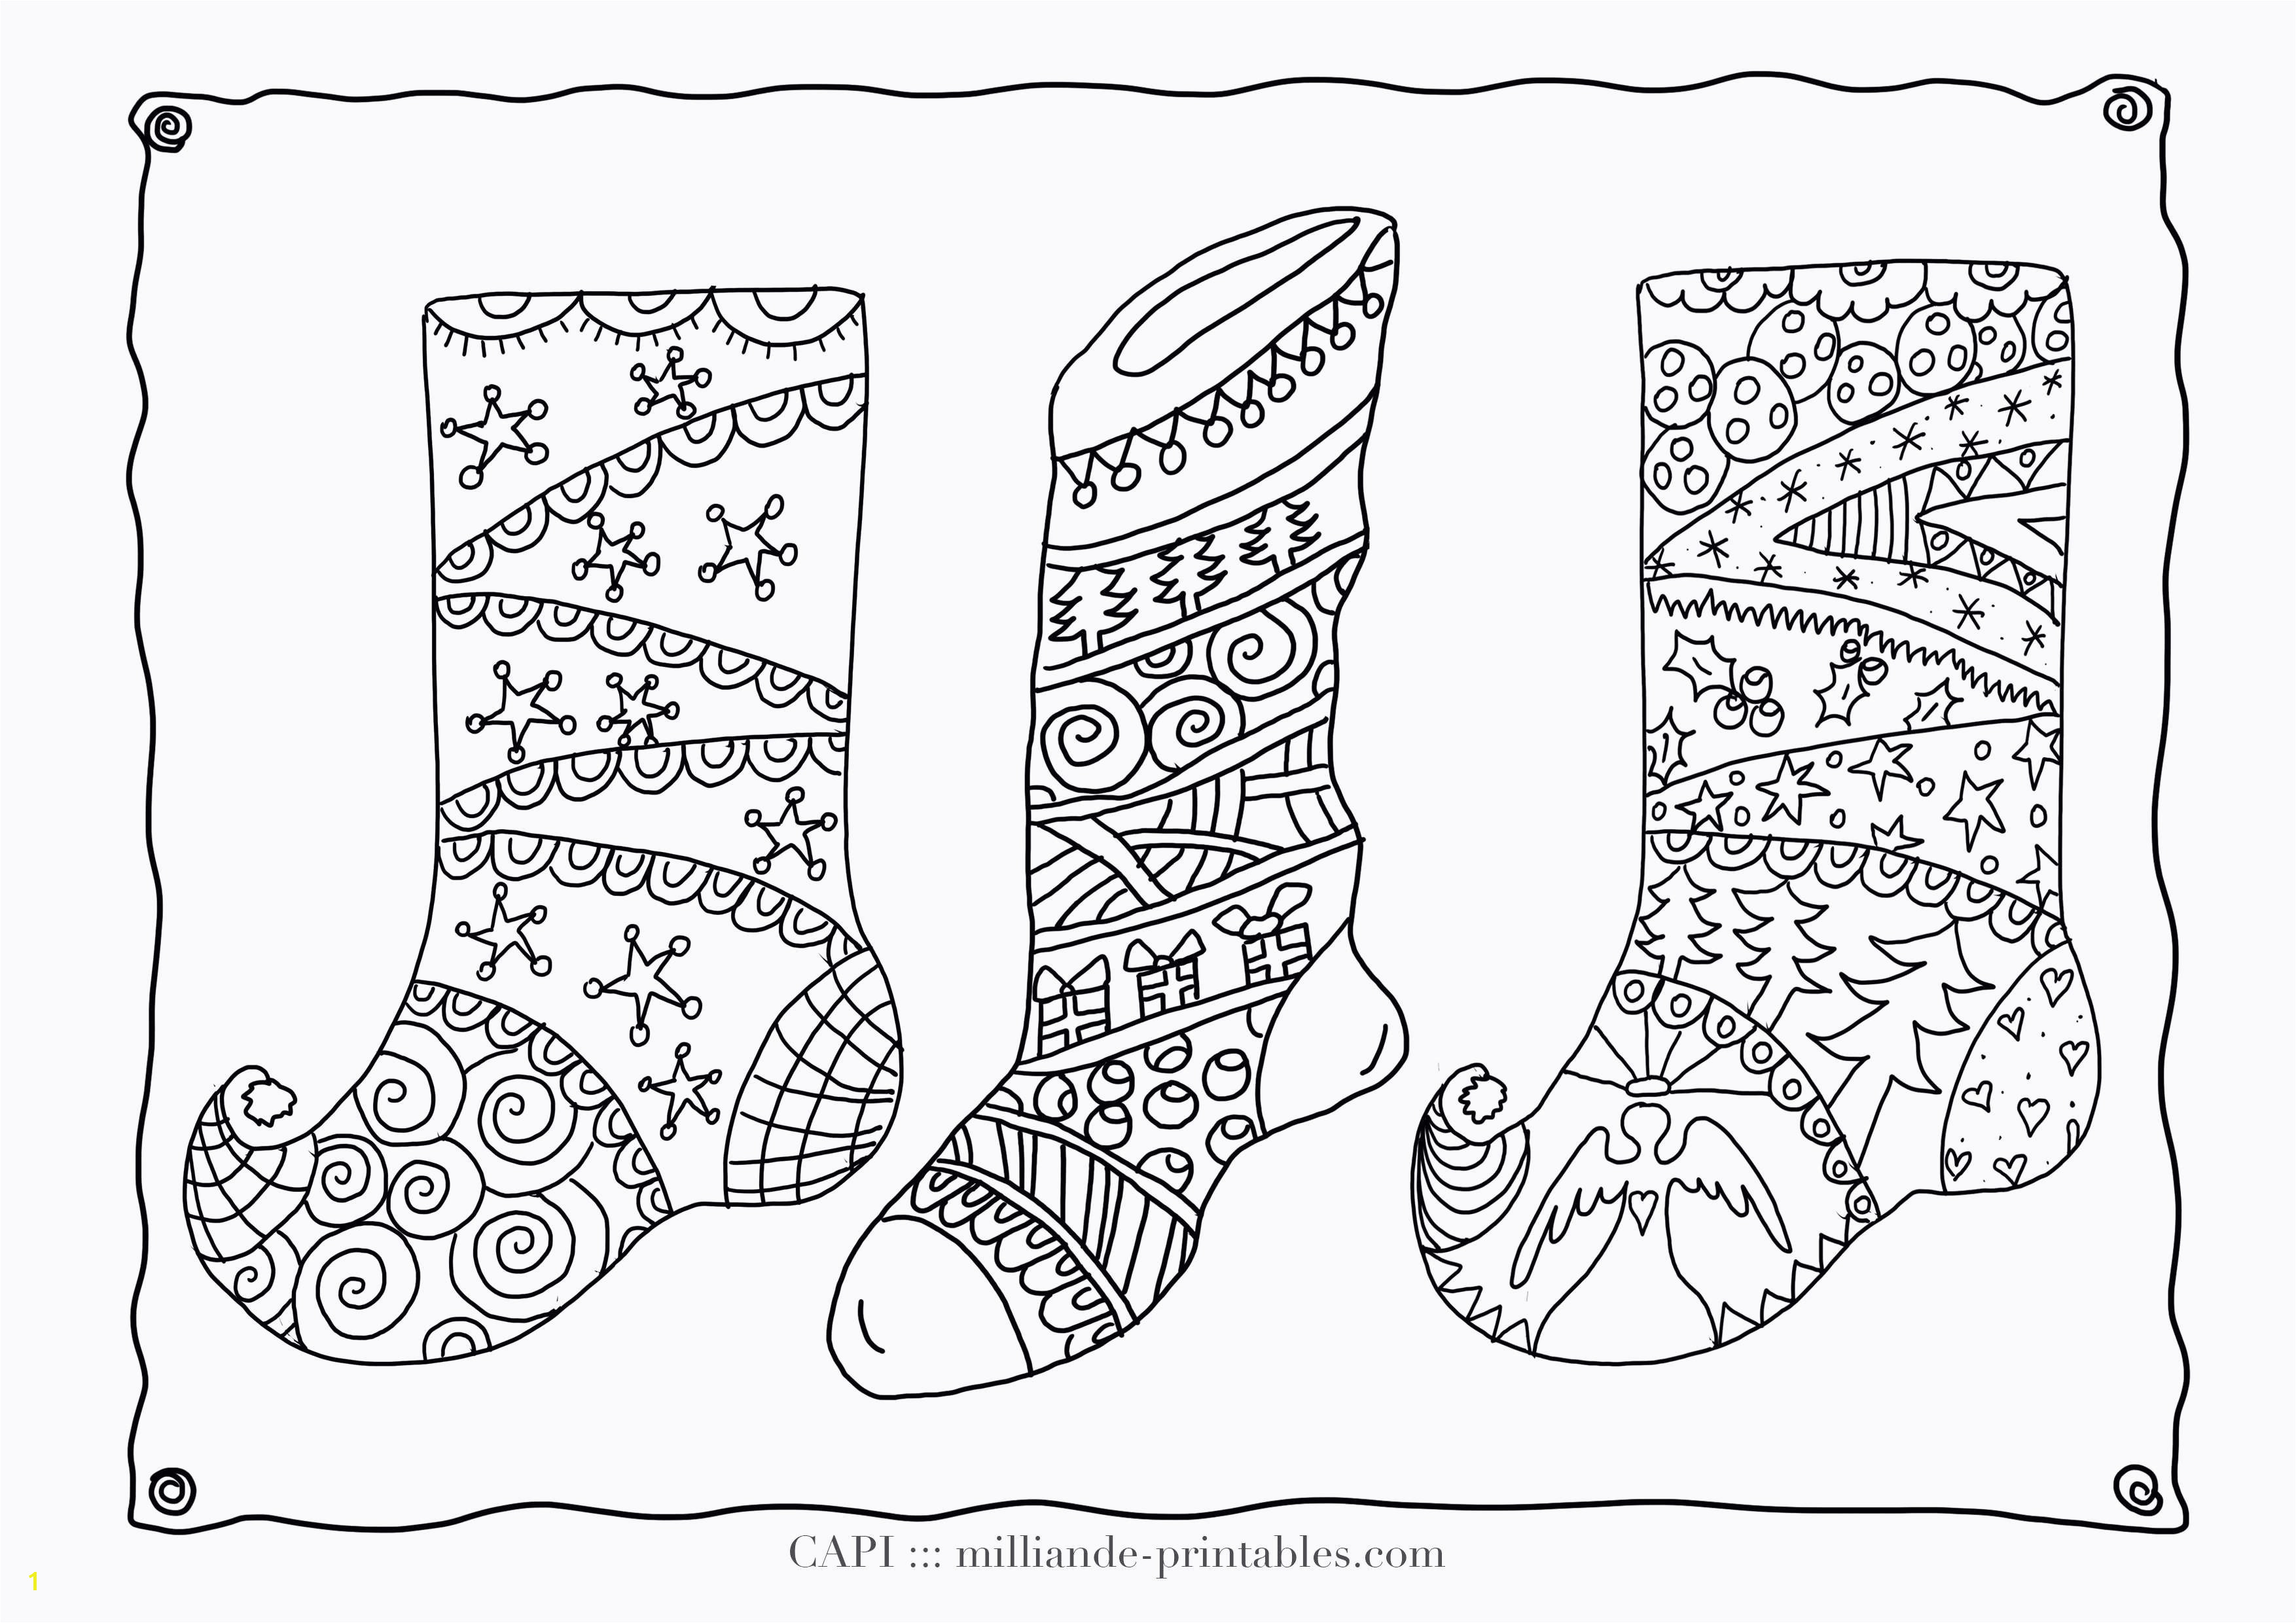 Print Coloring Pages Christmas Coloring Pages Free to Print Cool Coloring Printables 0d